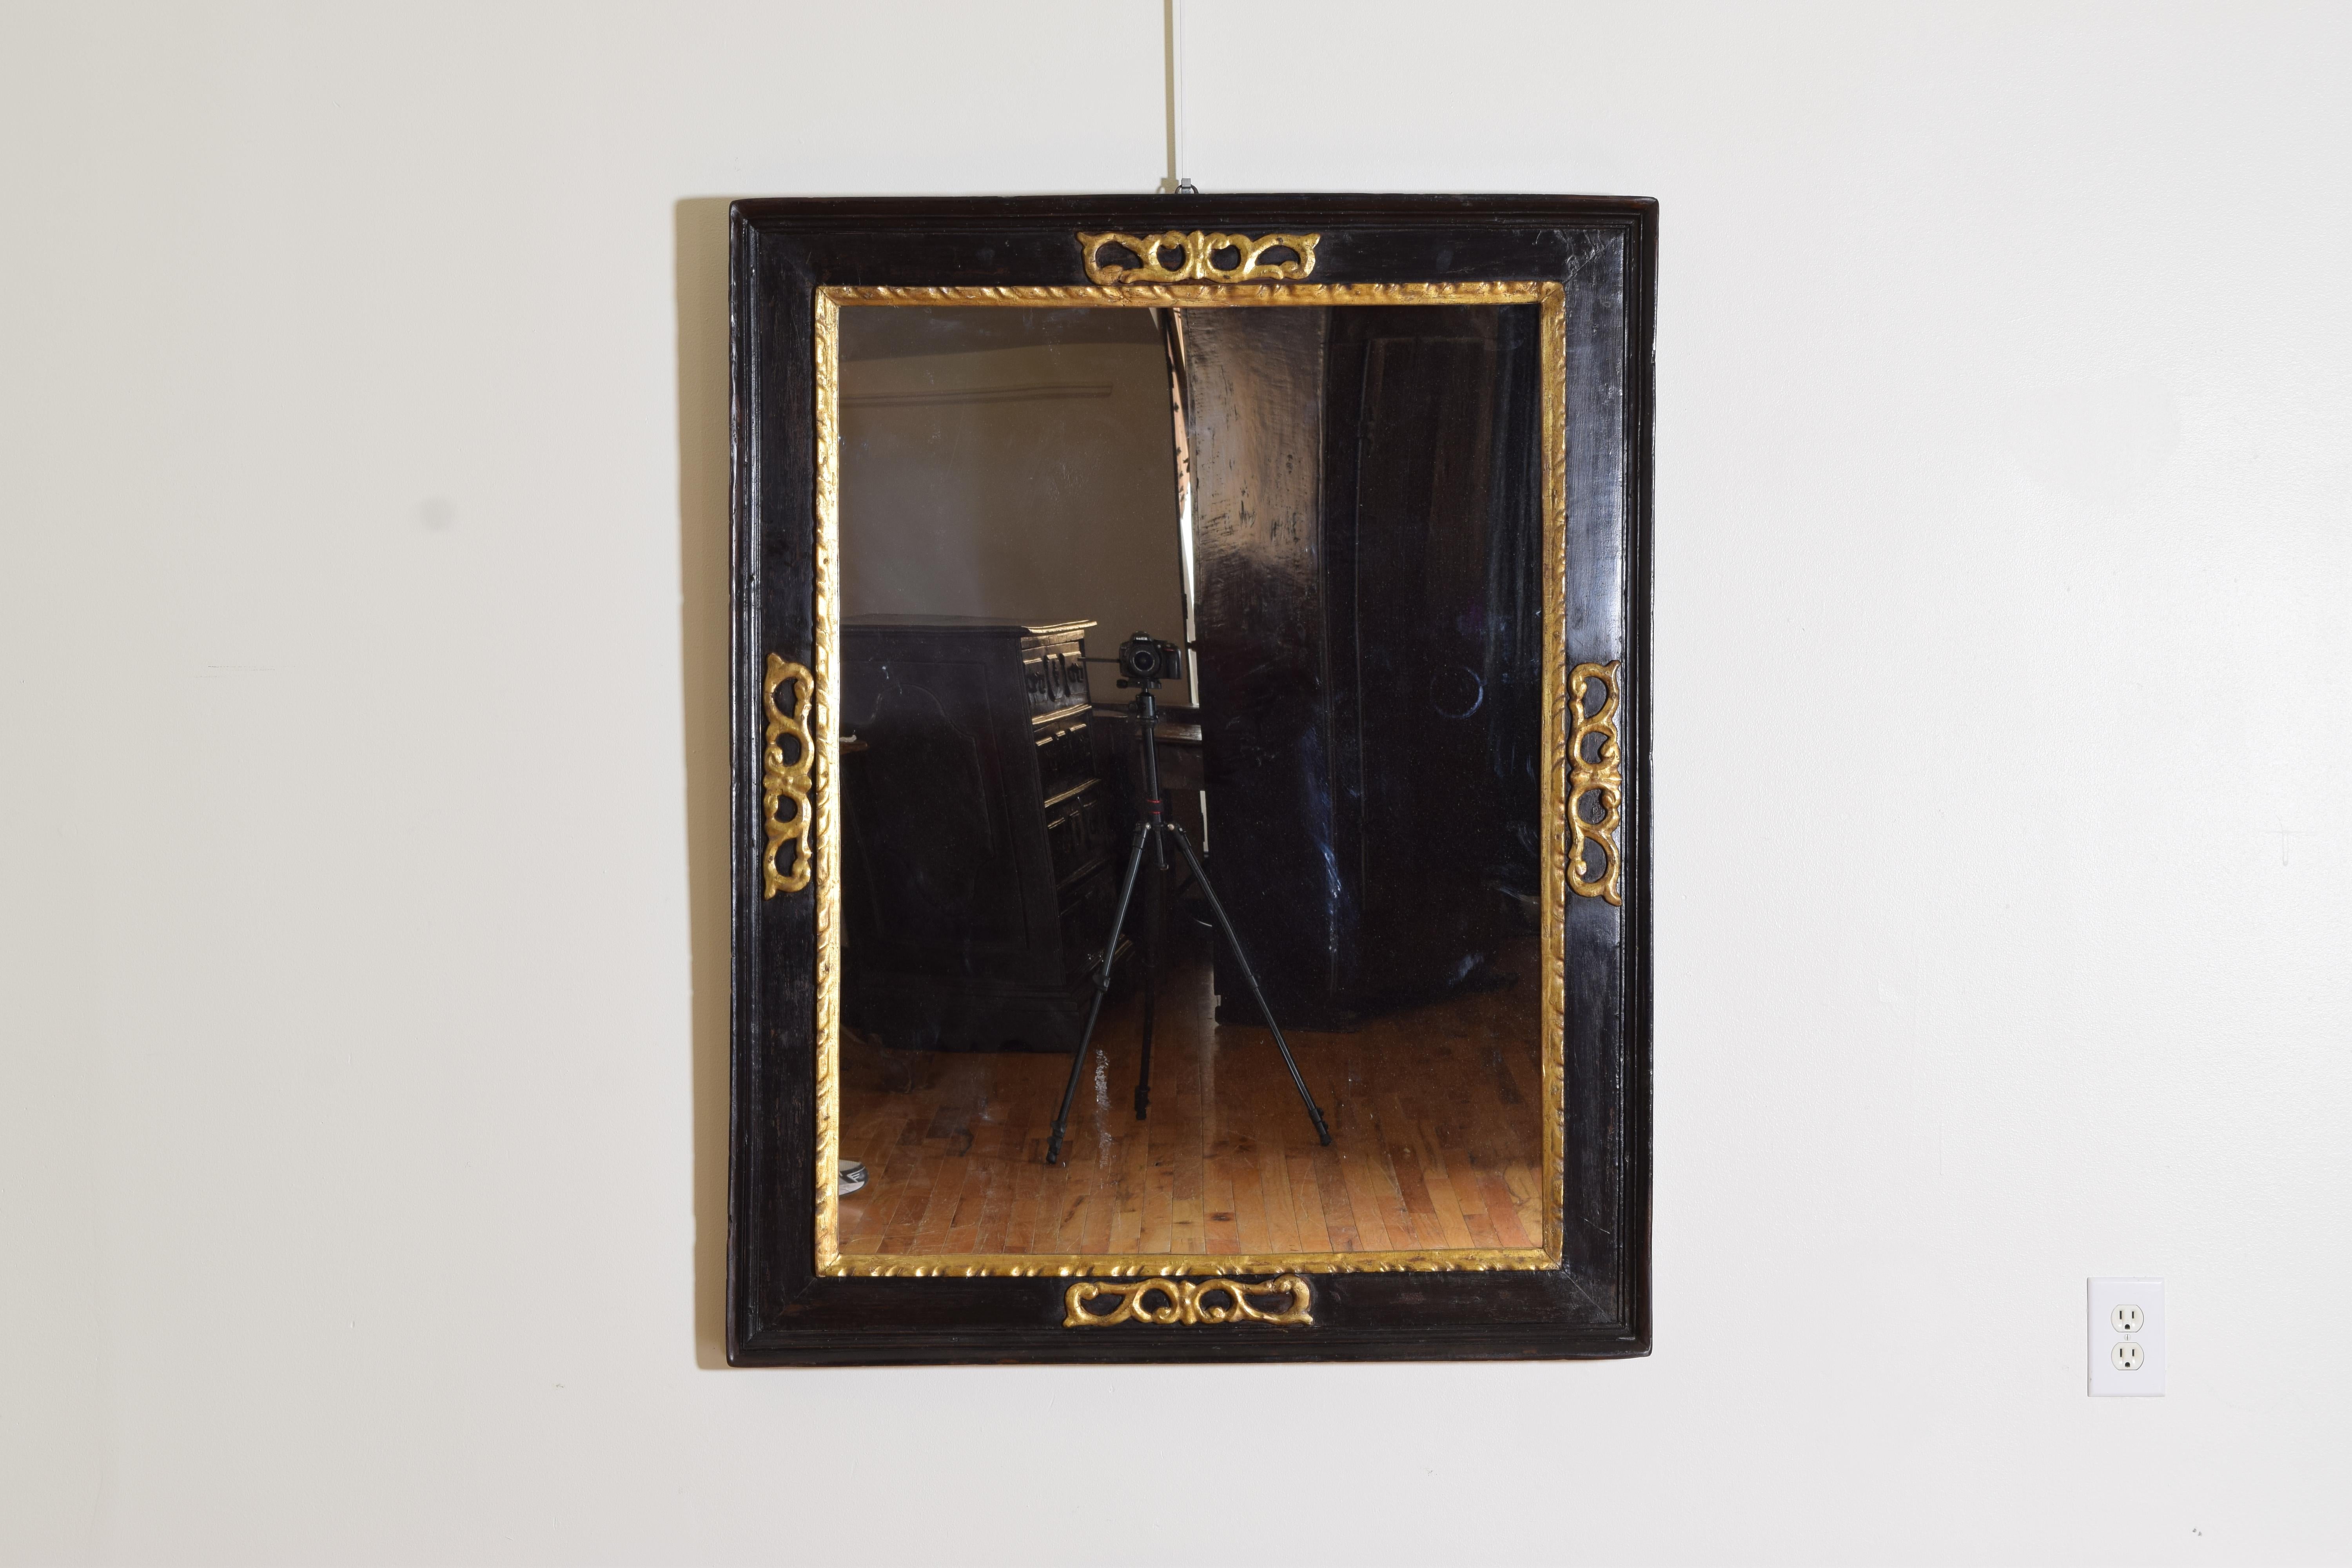 The rectangular ebonized frame having an outer molded edge, the interior adorned with giltwood carvings in circular scroll forms, the inner molding also giltwood, mirror plate is modern.